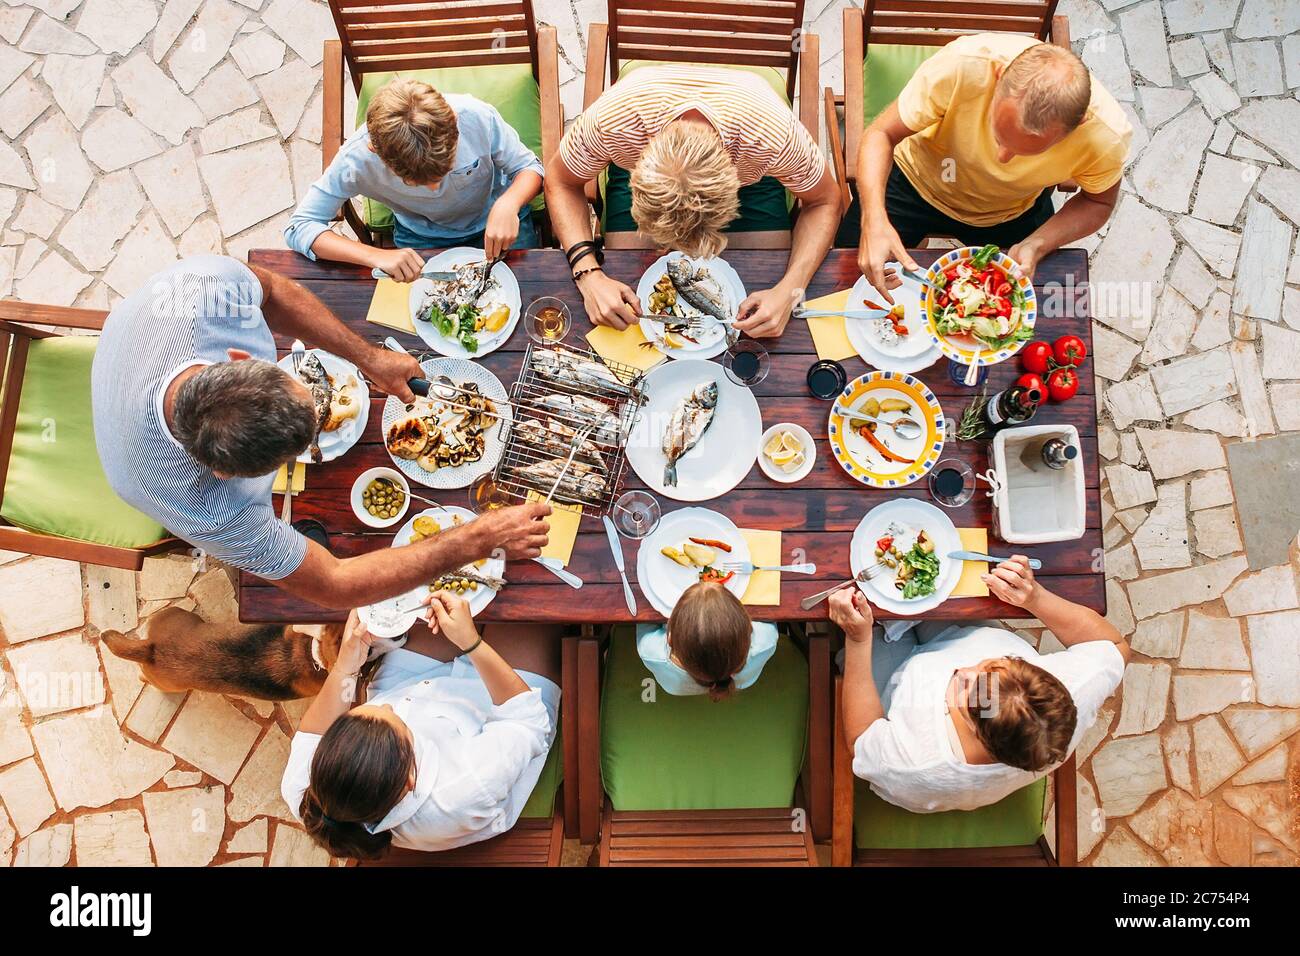 Big miltigeneration family dinner in process. Top view vertical image on  table with food and hands Stock Photo - Alamy